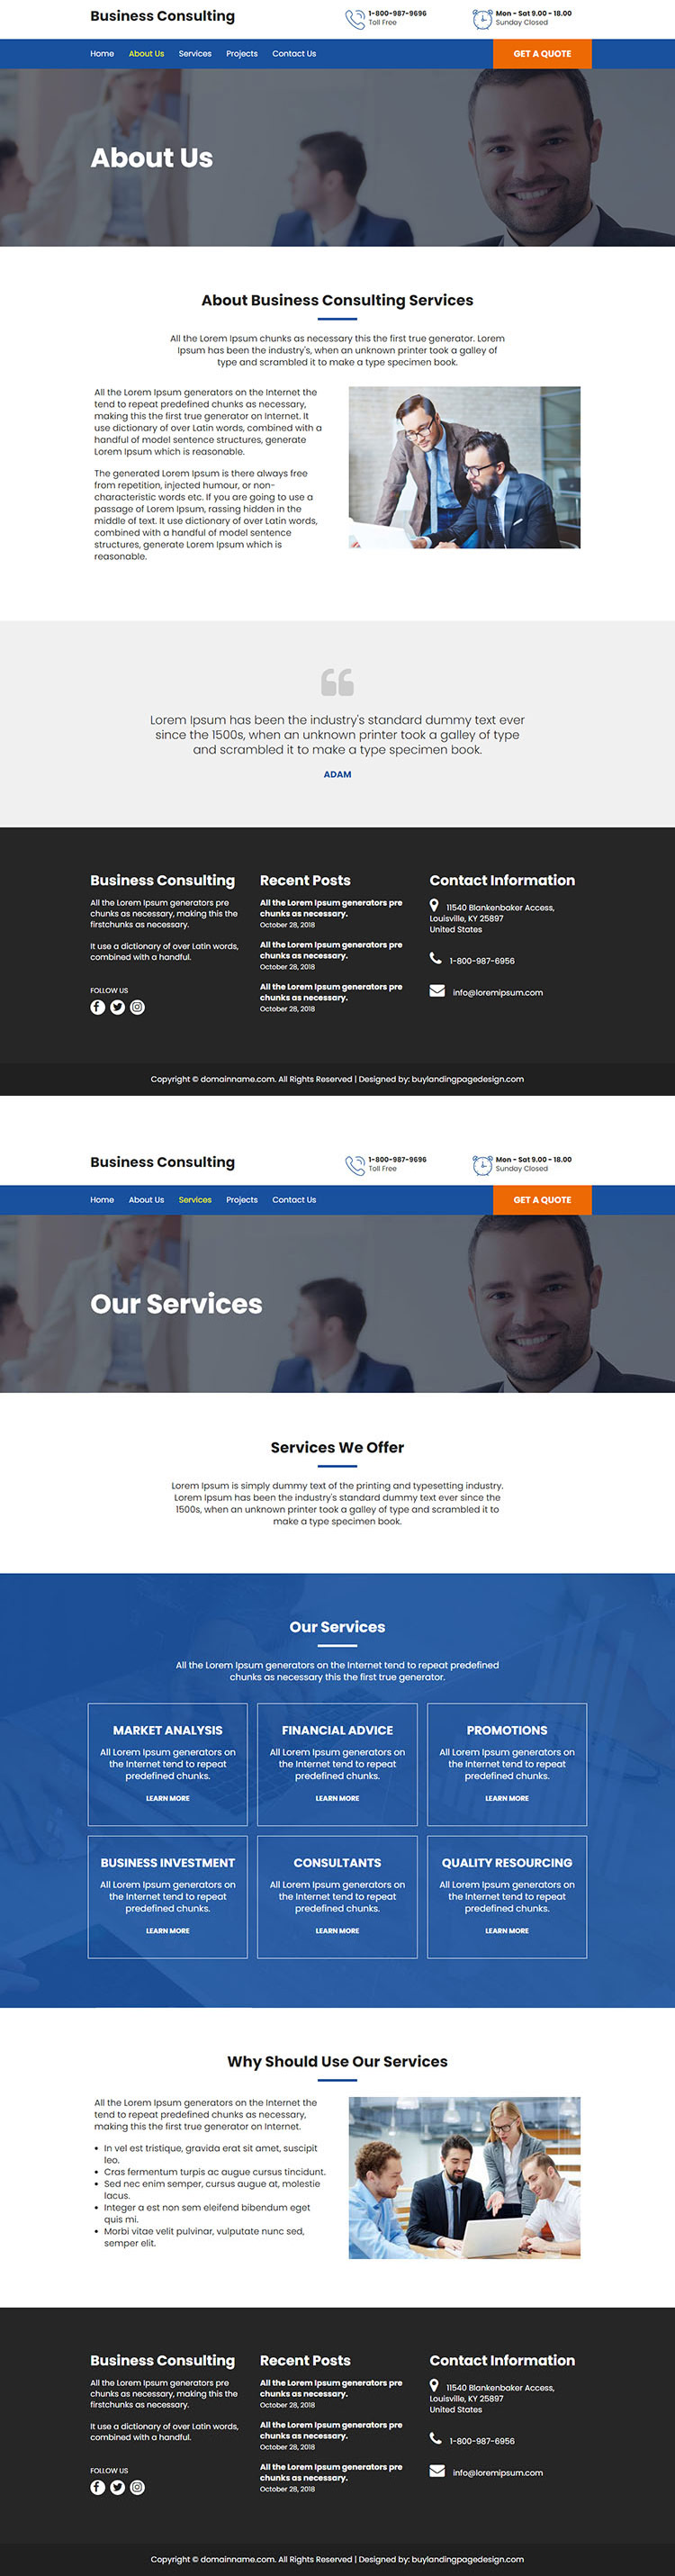 business consulting responsive website design